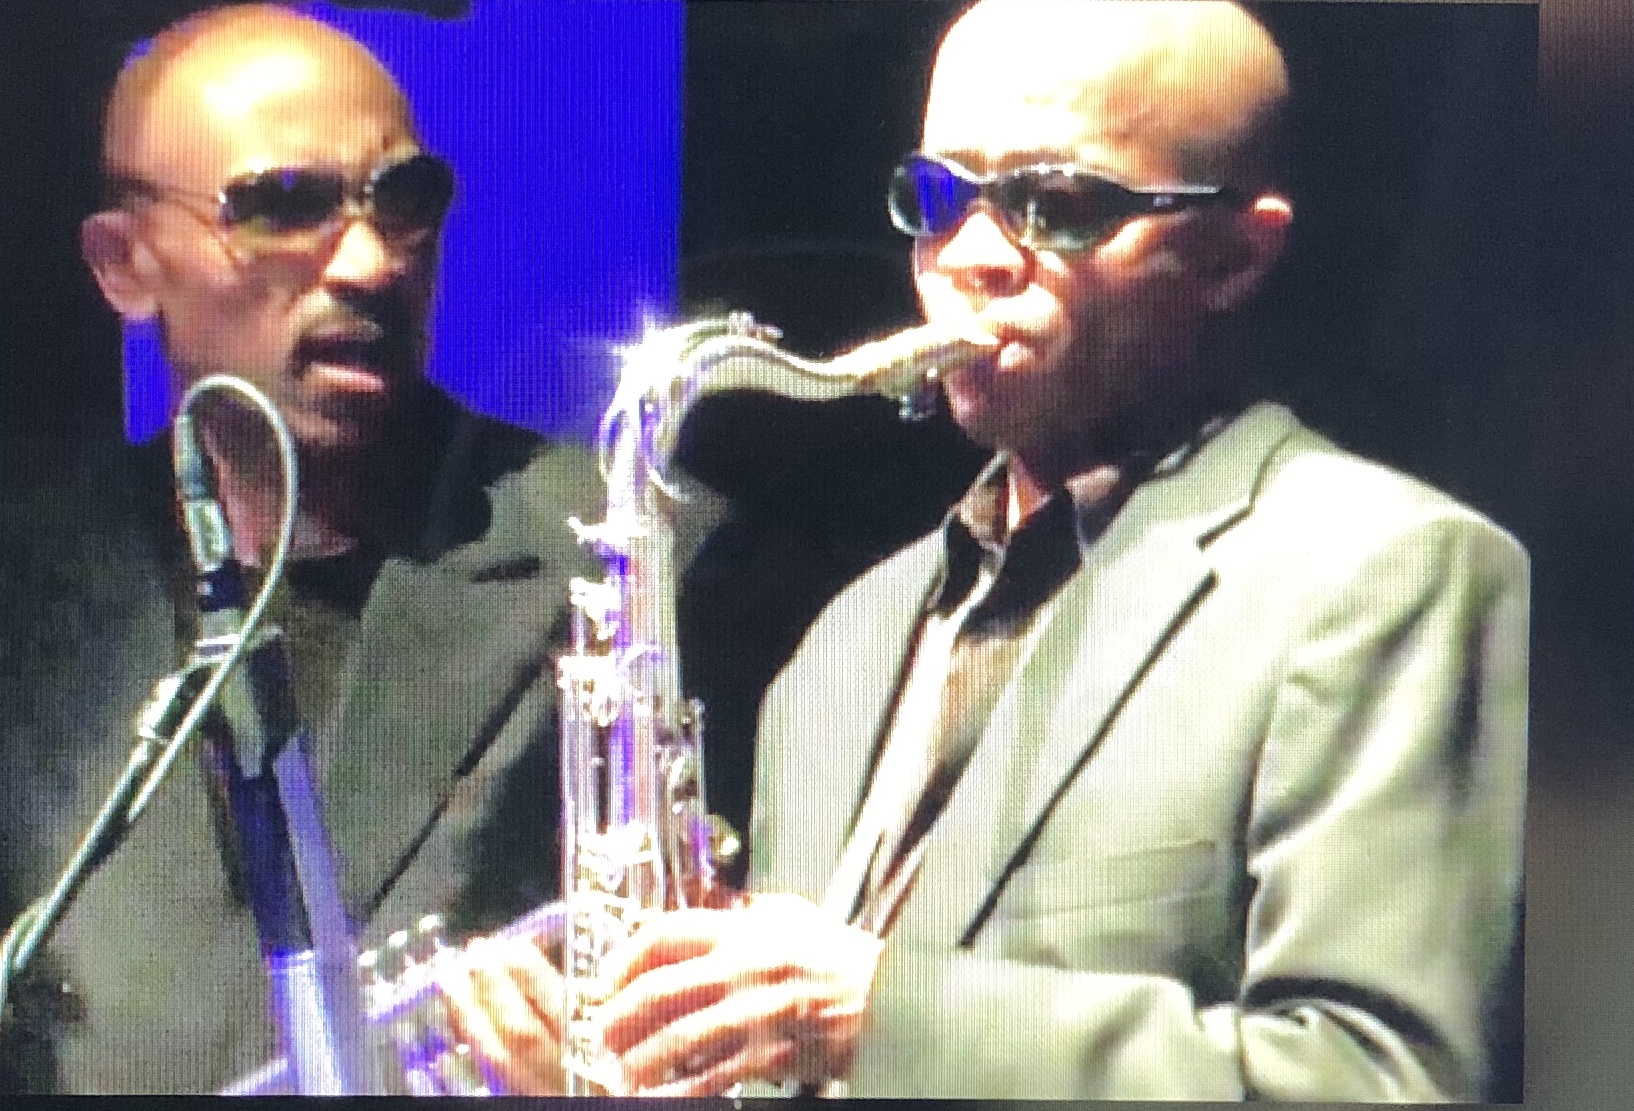 Johnny Long (Tenor Sax) and Buzzy Pindell (Trumpet)